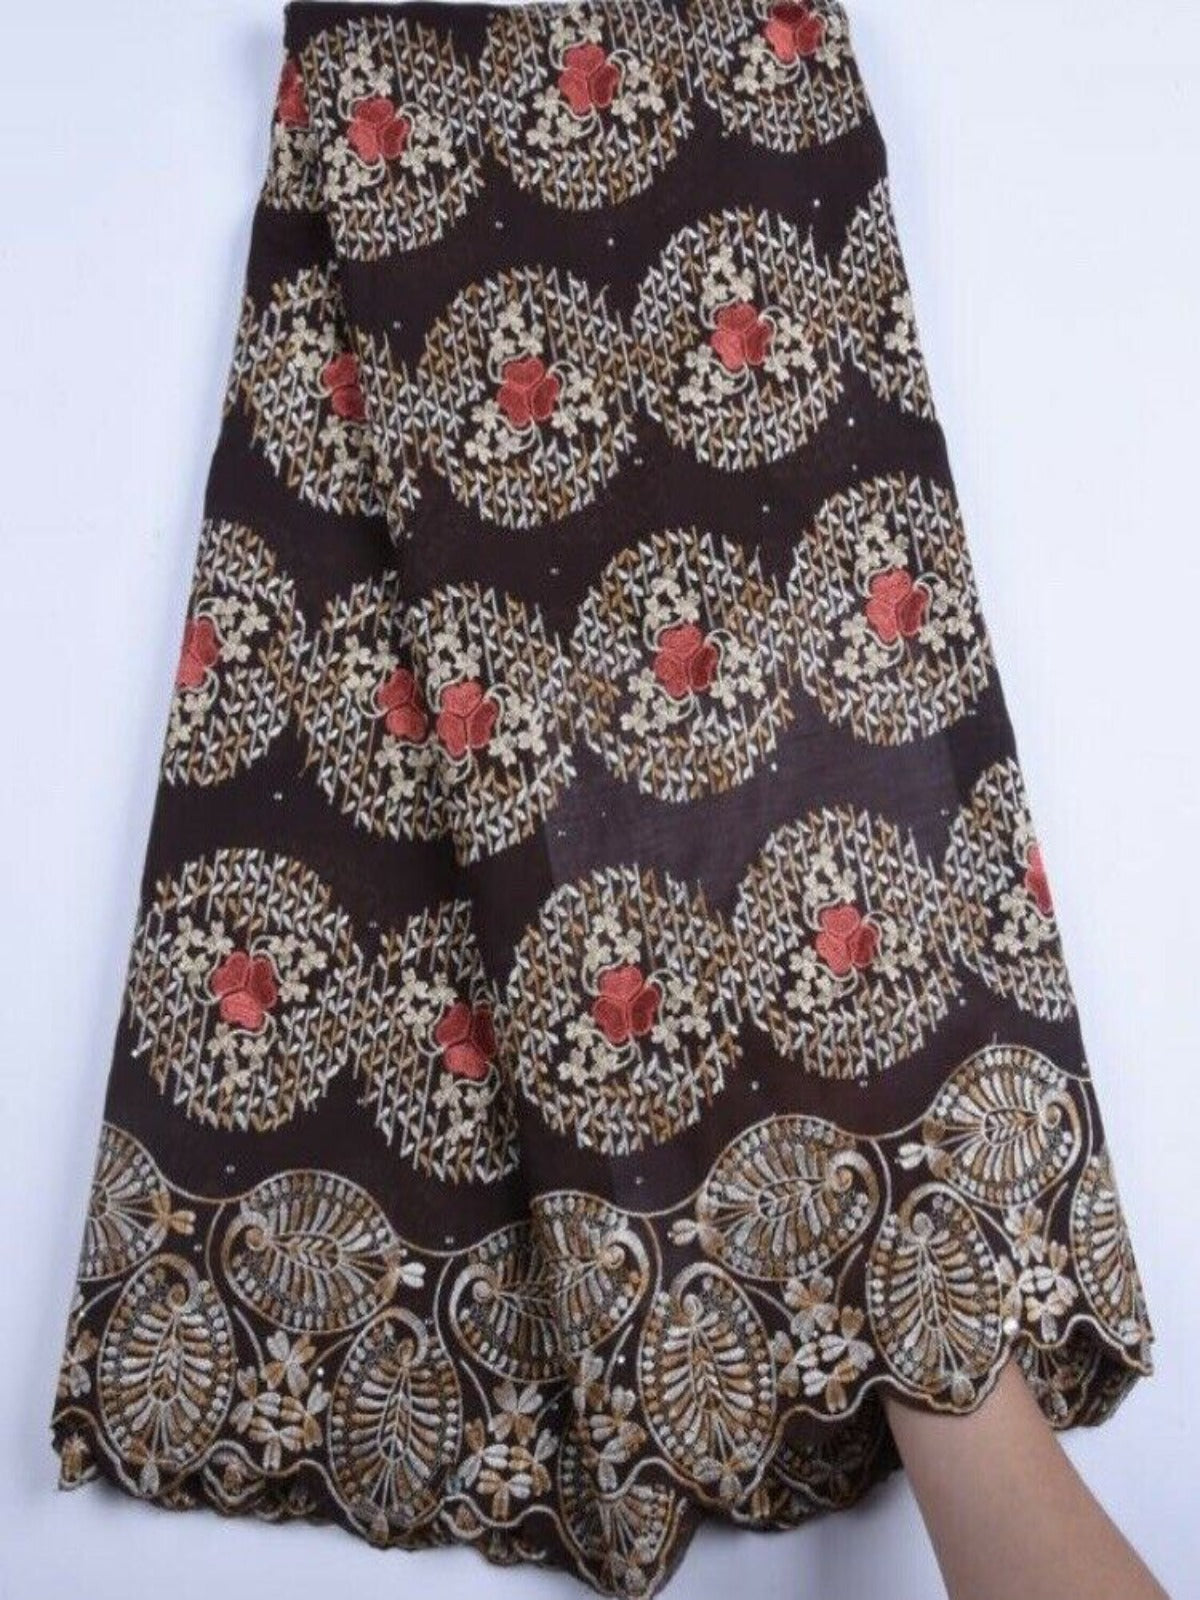 Swiss Cotton with Silk Embroidered Roses and Rhinestones